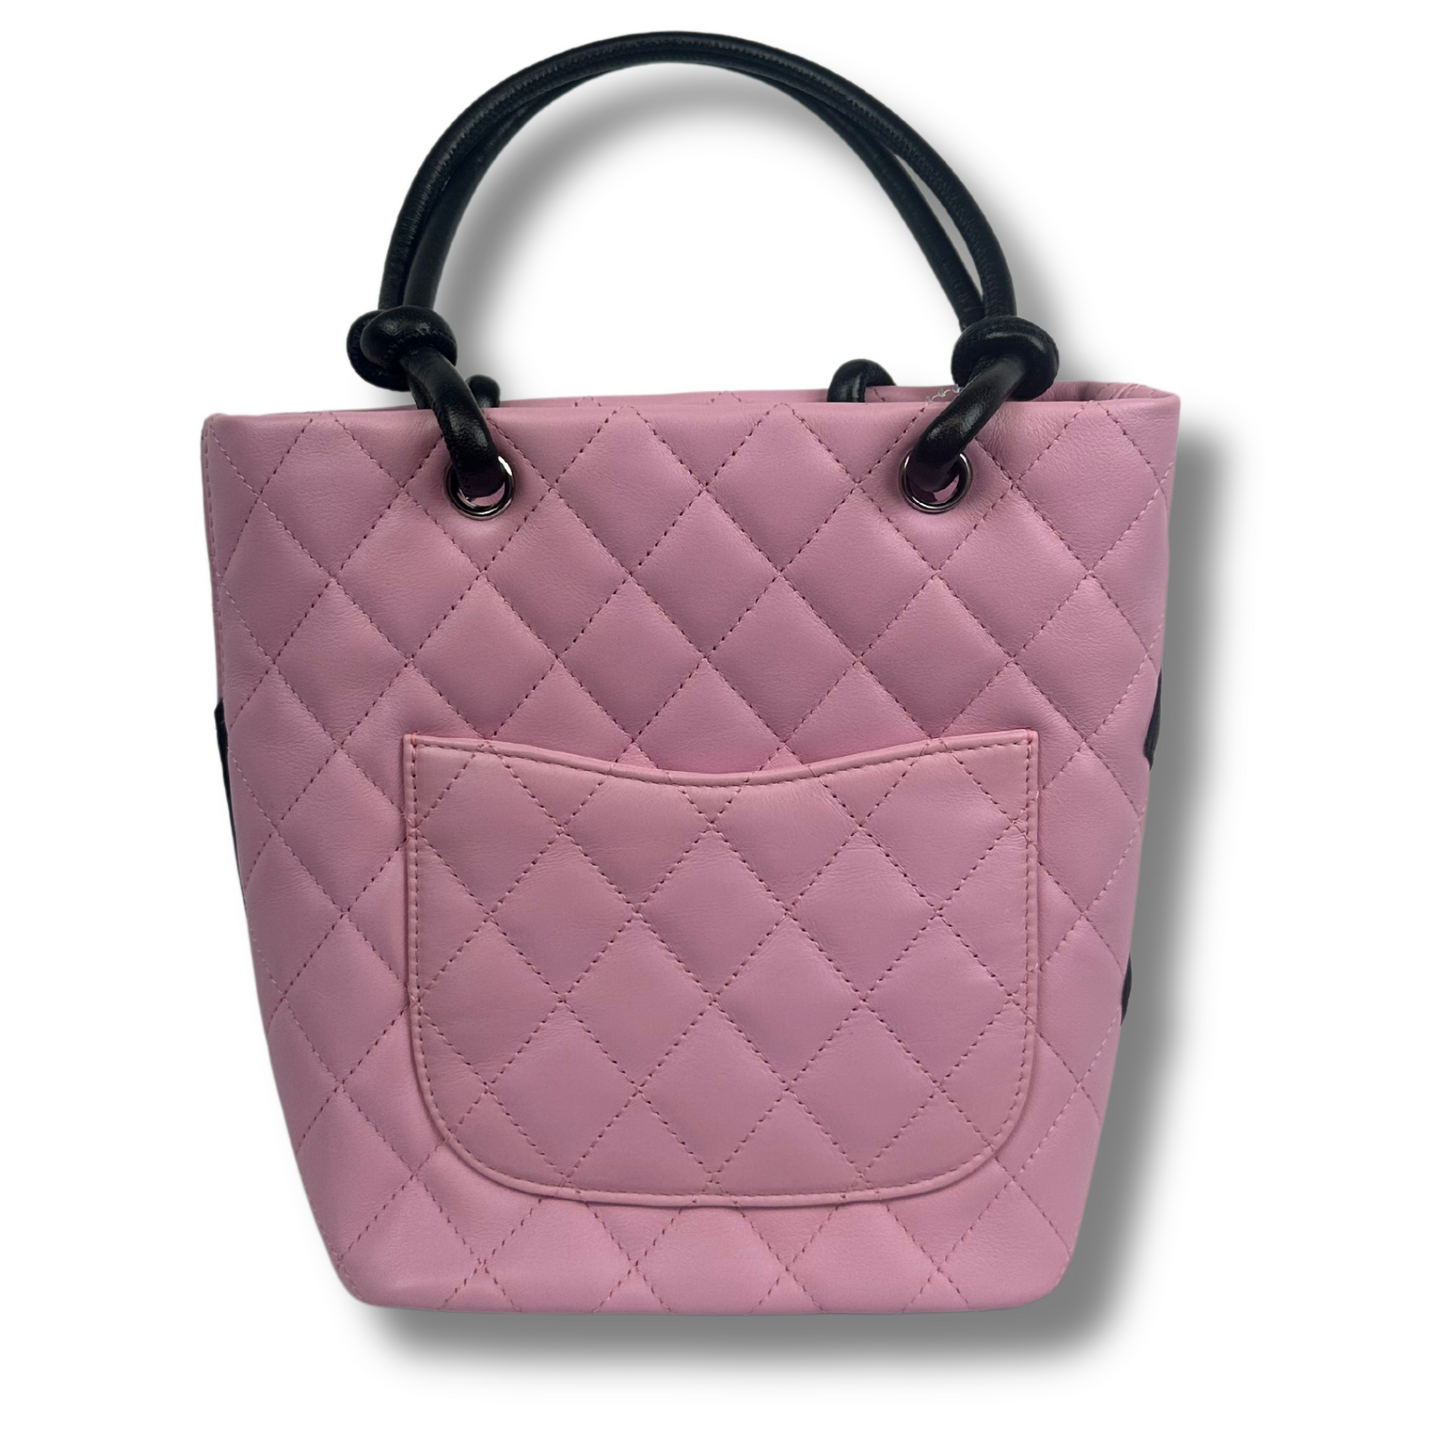 CHANEL Pink and Black Quilted Bucket Bag